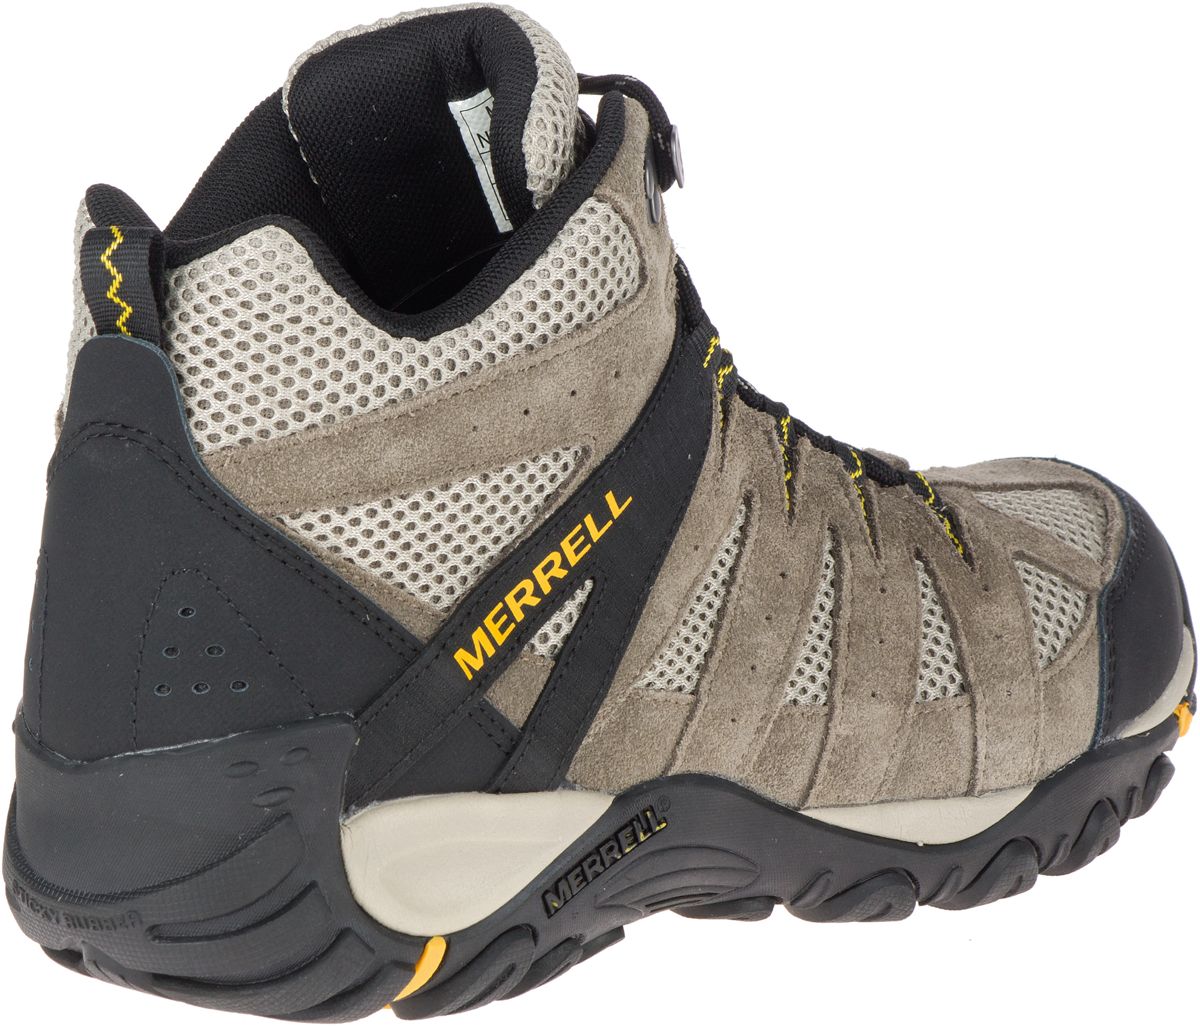 merrell men's accentor vent hiking shoes